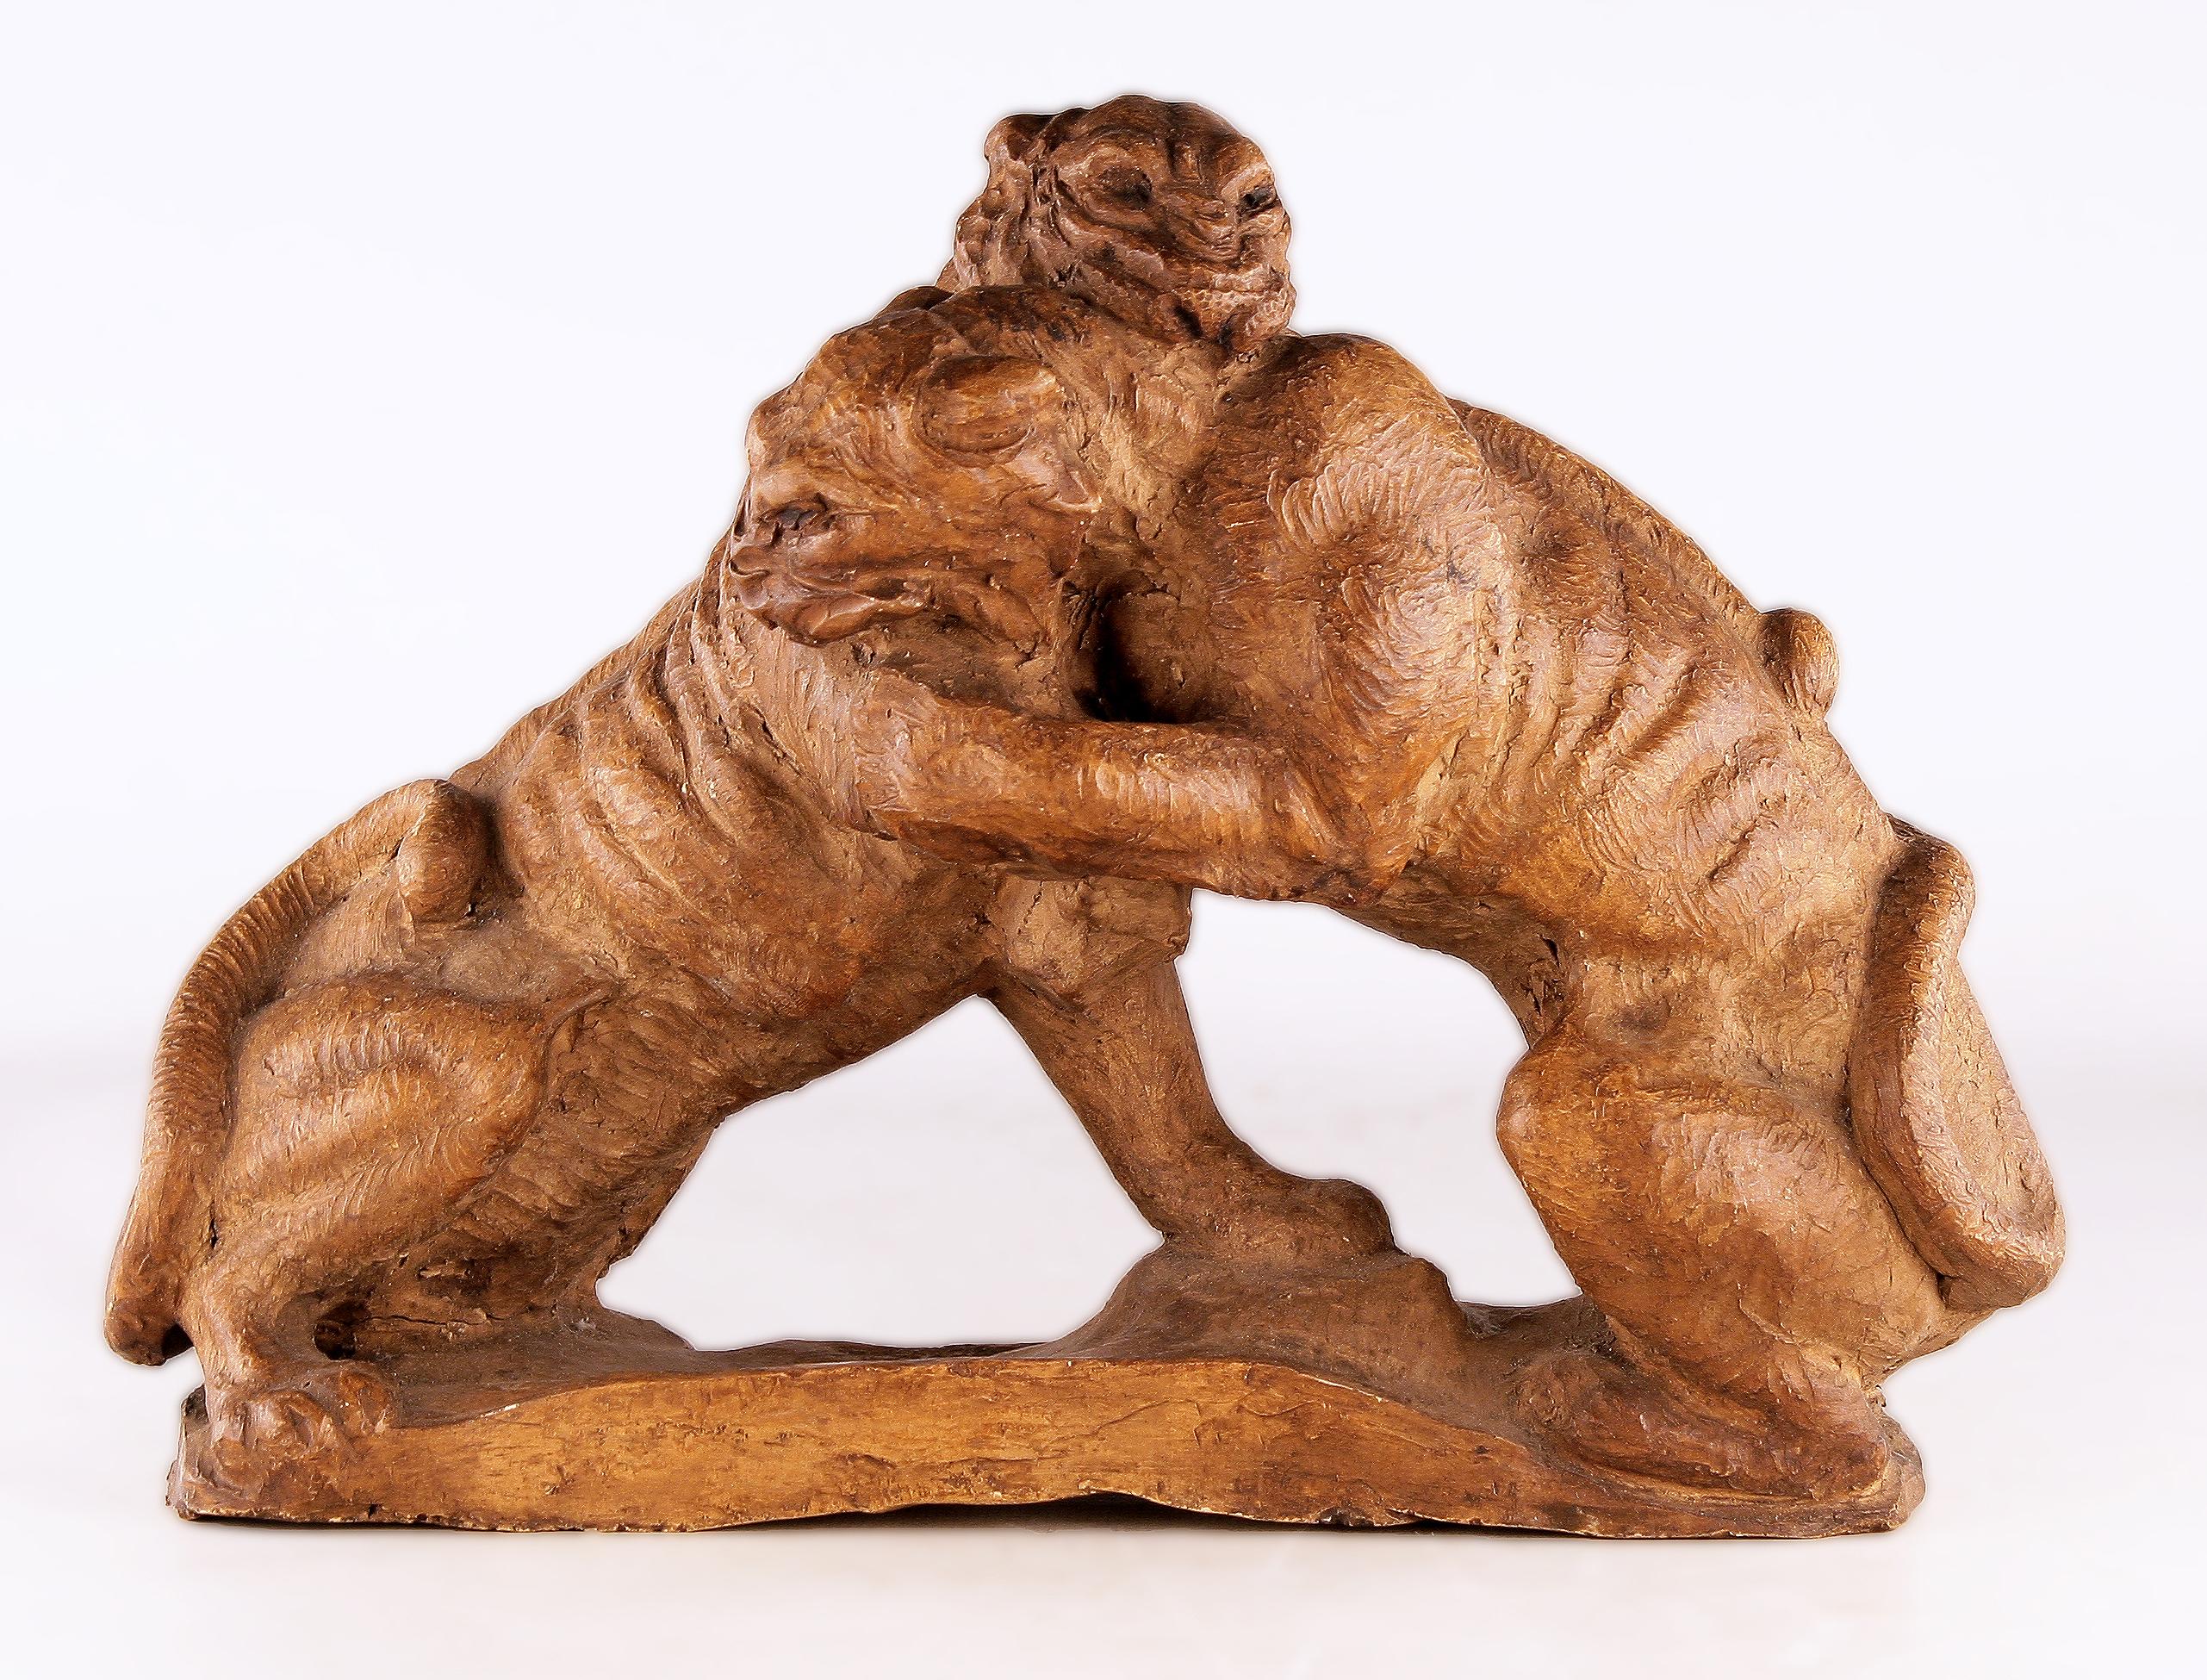 1920s french Art Déco terracota sculpture of a couple of felines/panthers fighting

By: unknown
Material: terracotta
Technique: hand-crafted, molded, carved, hand-carved, unglazed
Dimensions: 4 in x 11 in x 8 in
Date: early 20th century, circa